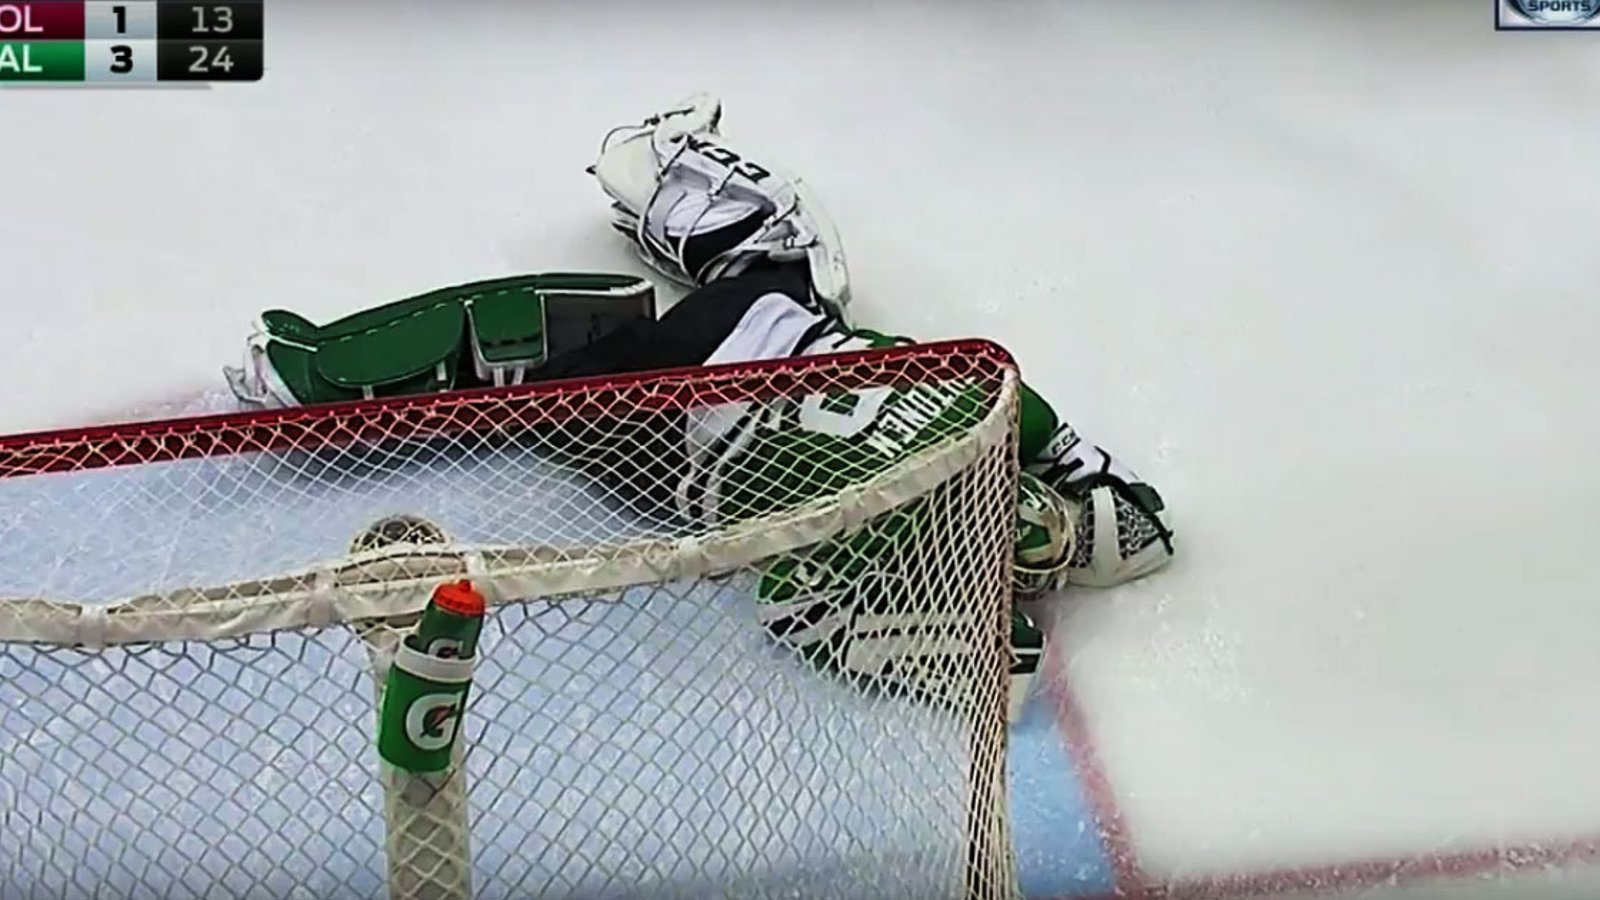 Lehtonen forced to leave after collision with Iginla!